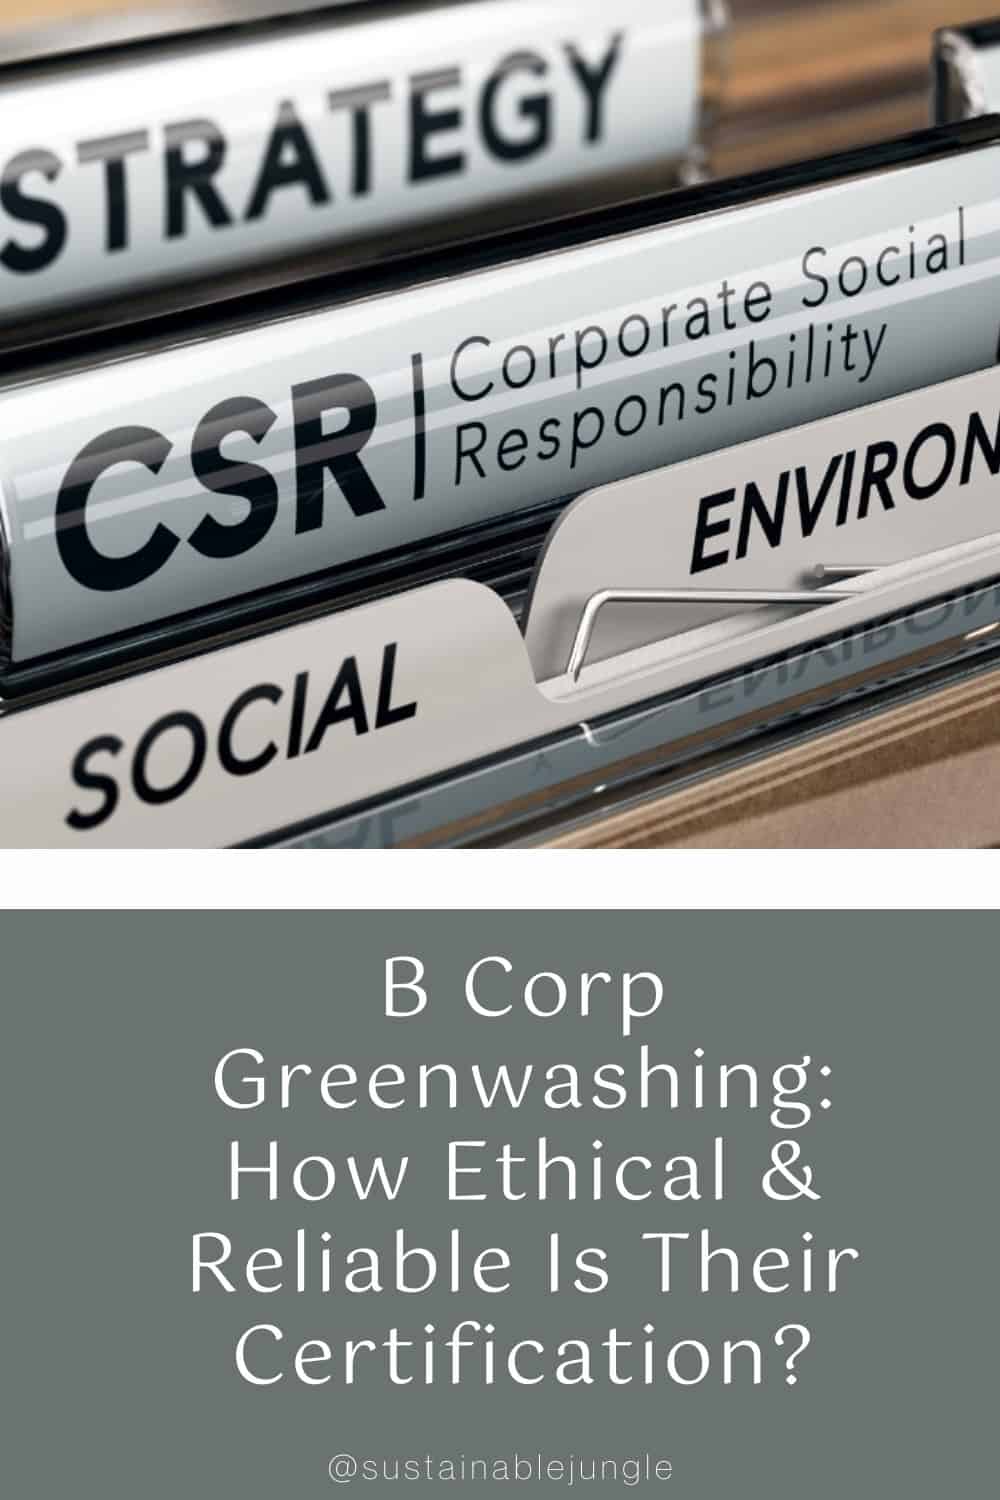 B Corp Greenwashing: How Ethical & Reliable Is Their Certification? #bcorpgreenwashing #bcorpissues #bcorpethics #bcorpcontroversies #sustainablejungle Image by Olivier Le Moal via Getty Images on Canva Pro